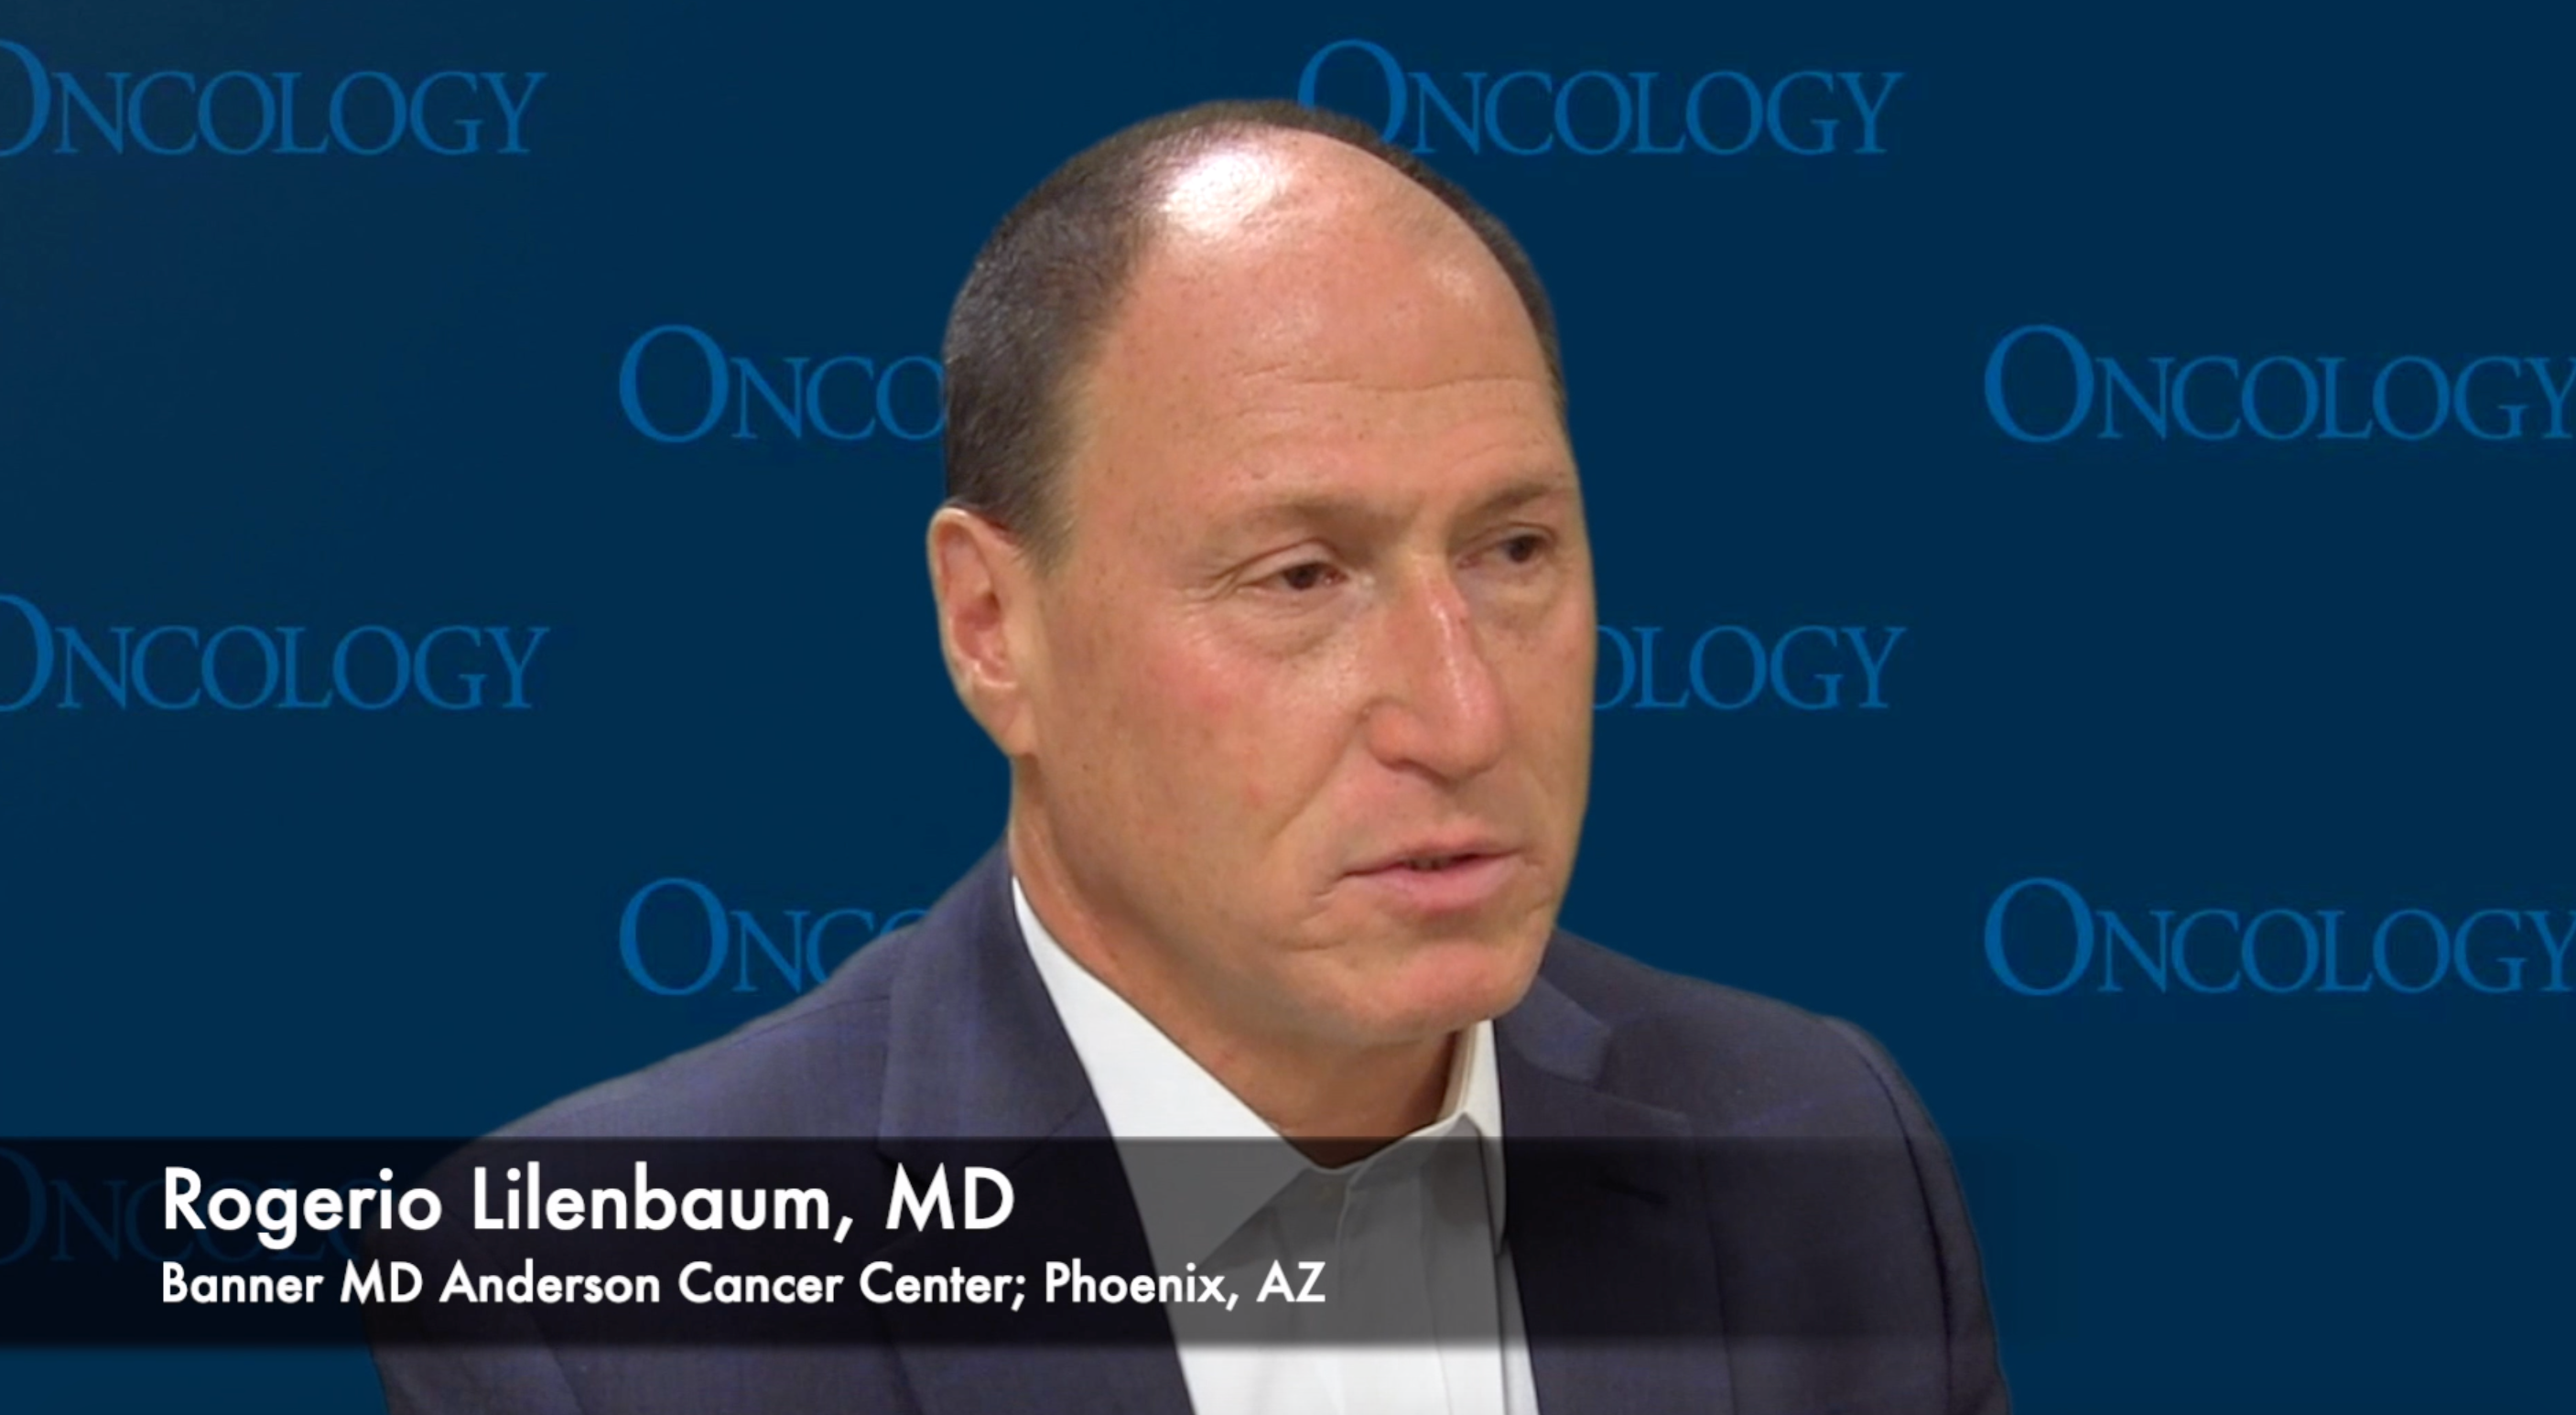 Rogerio Lilenbaum, MD, Discusses Immunotherapy and Targeted Therapy for Lung Cancer